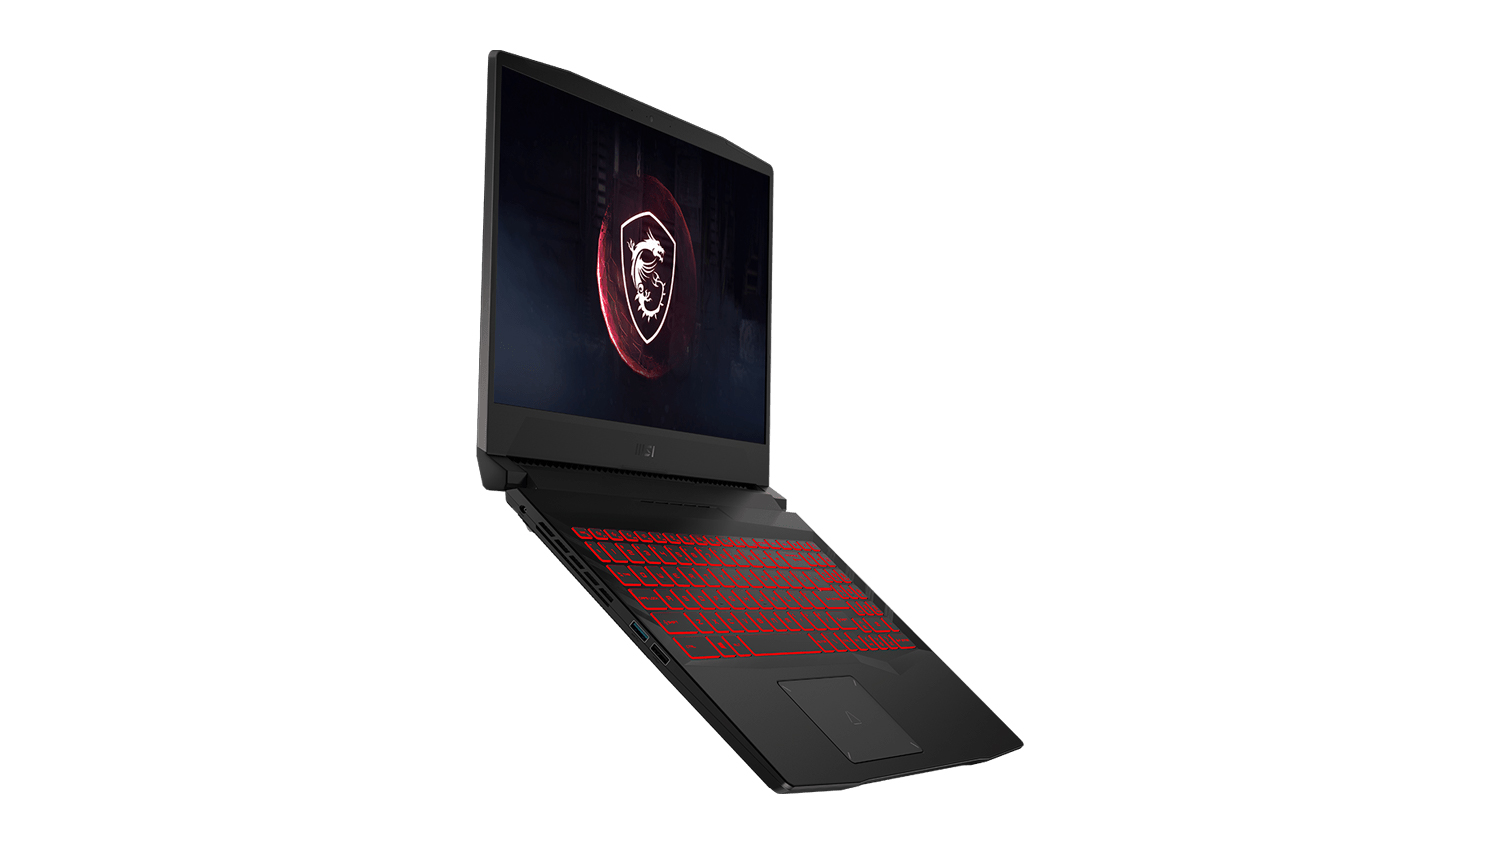 MSI Pulse GL66 with its backlit keyboard lit up red on a white background